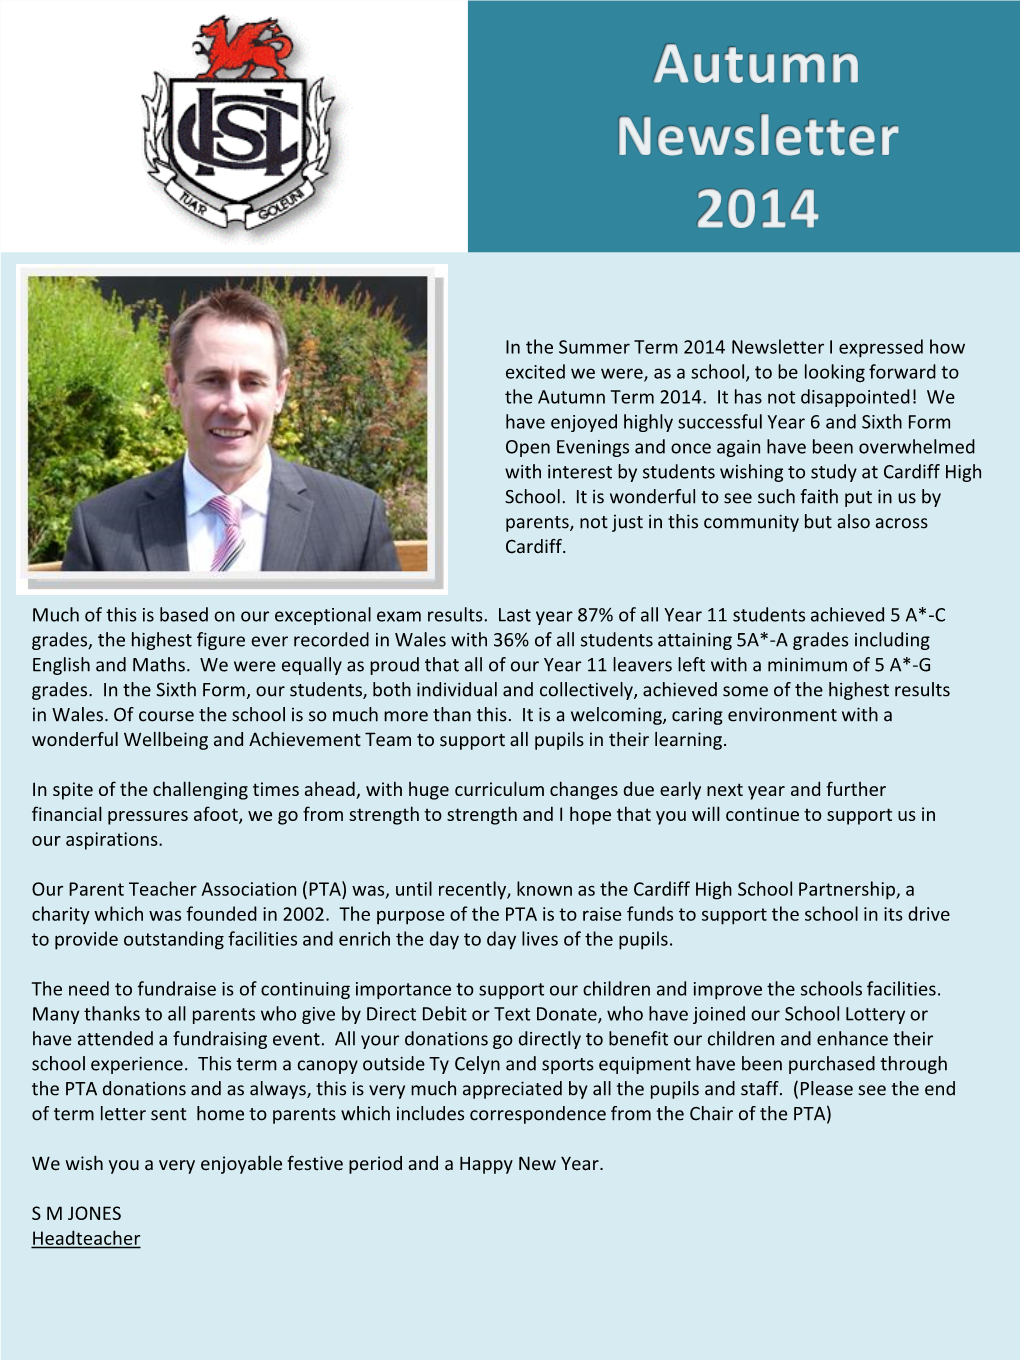 In the Summer Term 2014 Newsletter I Expressed How Excited We Were, As a School, to Be Looking Forward to the Autumn Term 2014